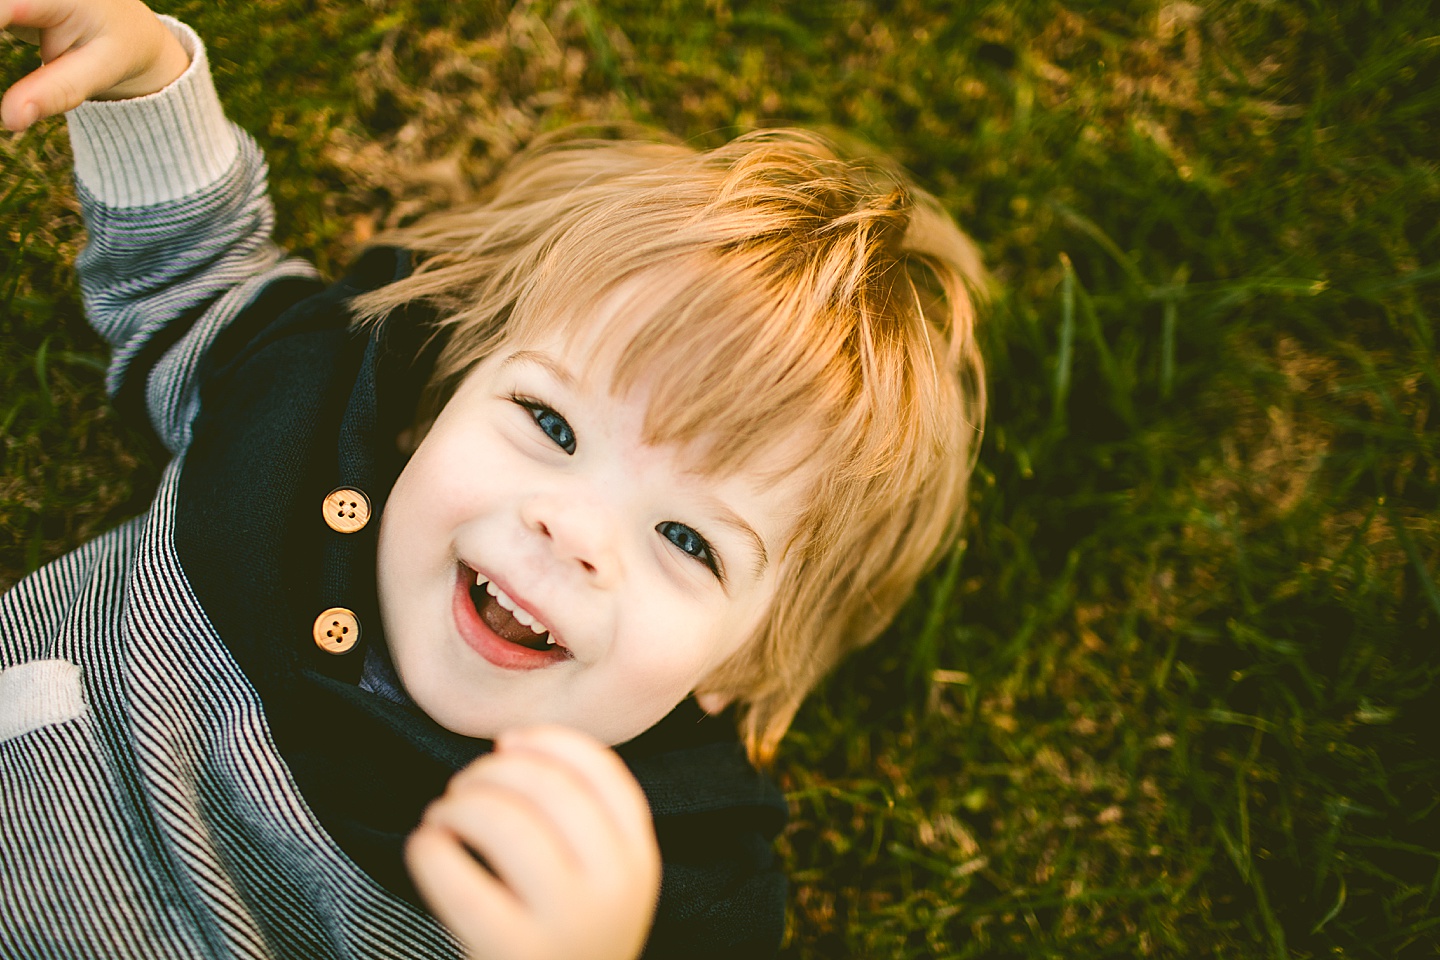 Toddler laughing on the grass